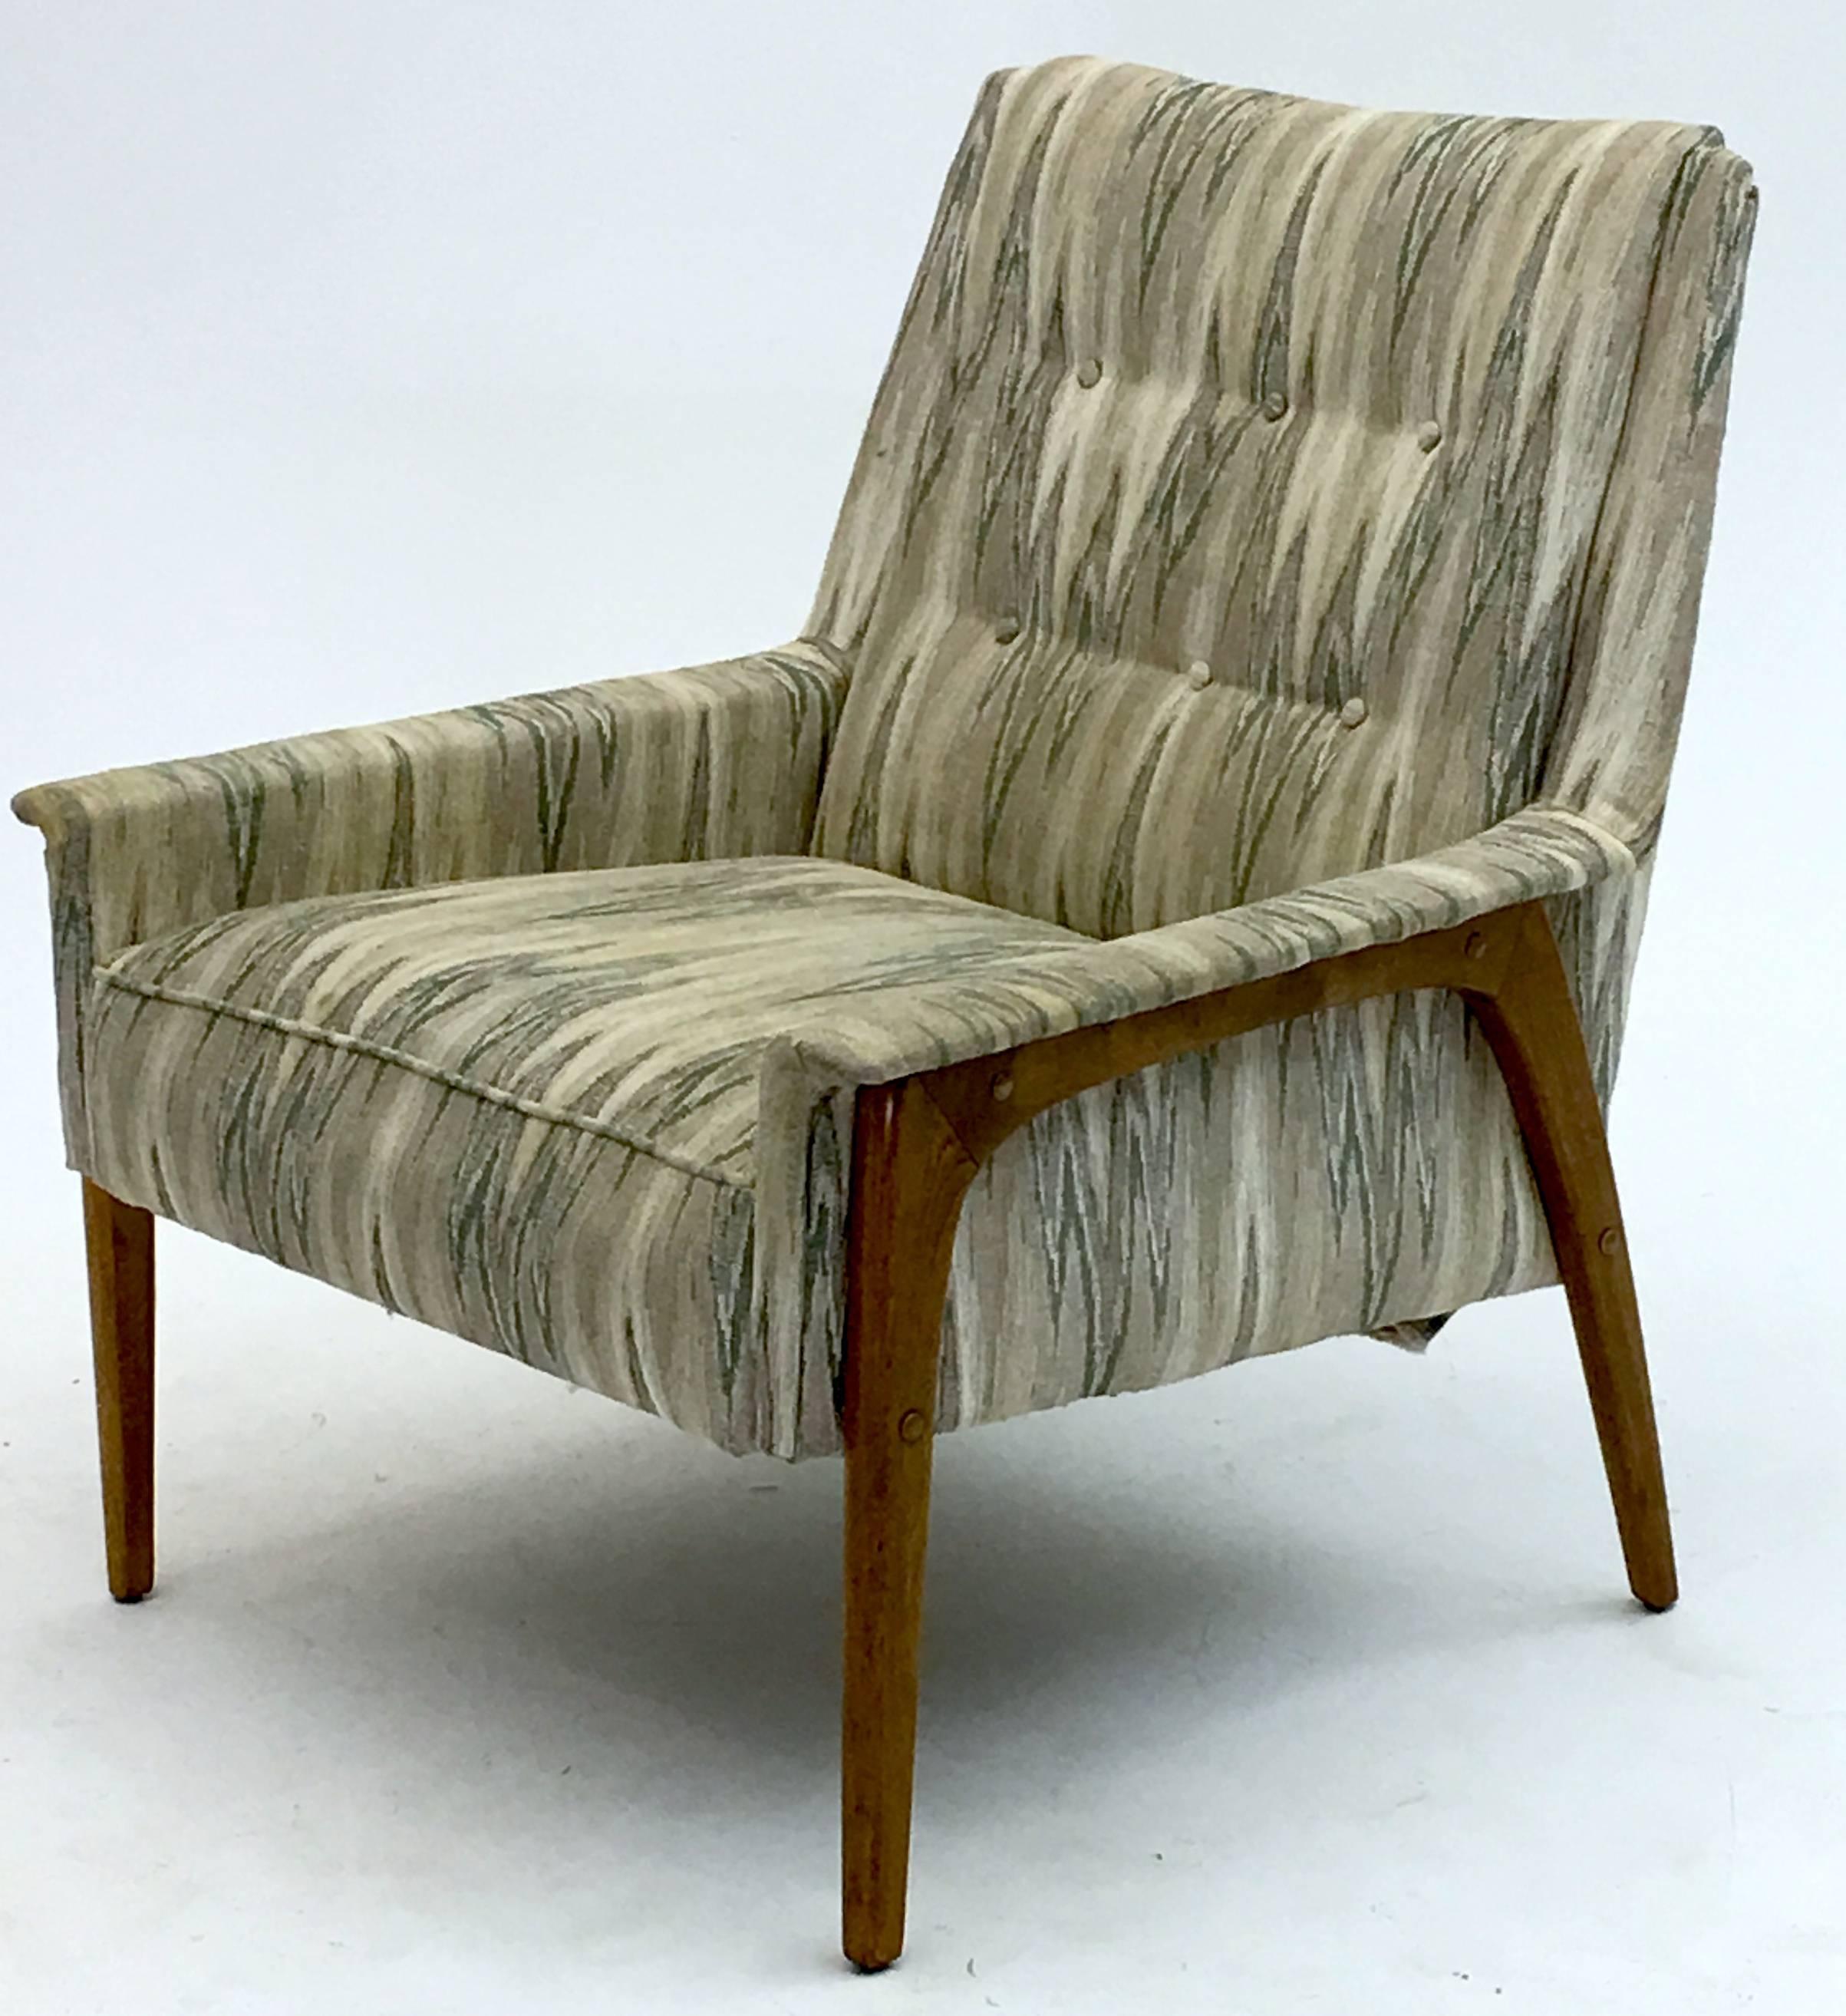 
A true vintage model armchair from the early 1950's, this chair is either produced by Selig in the Danish style or DUX of Sweden. The frames are finished in a walnut type of finish but are actually oak or birch.

It has been reupholstered at least